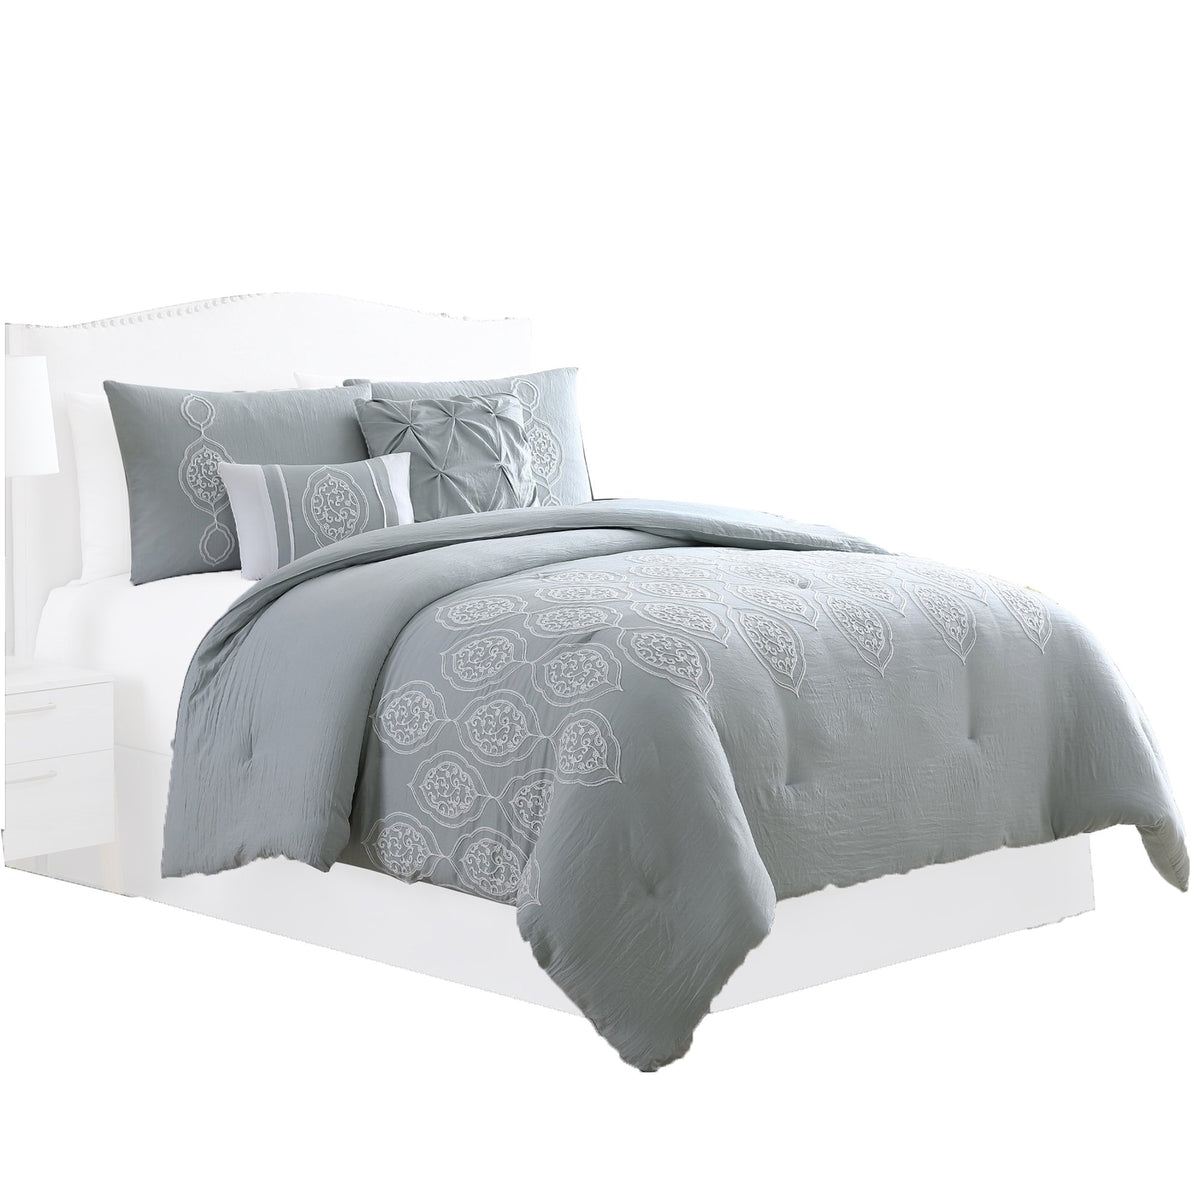 Ohio 5 Piece Queen Comforter Set with Scrolled Motifs, Gray and White by The Urban Port - BM231608